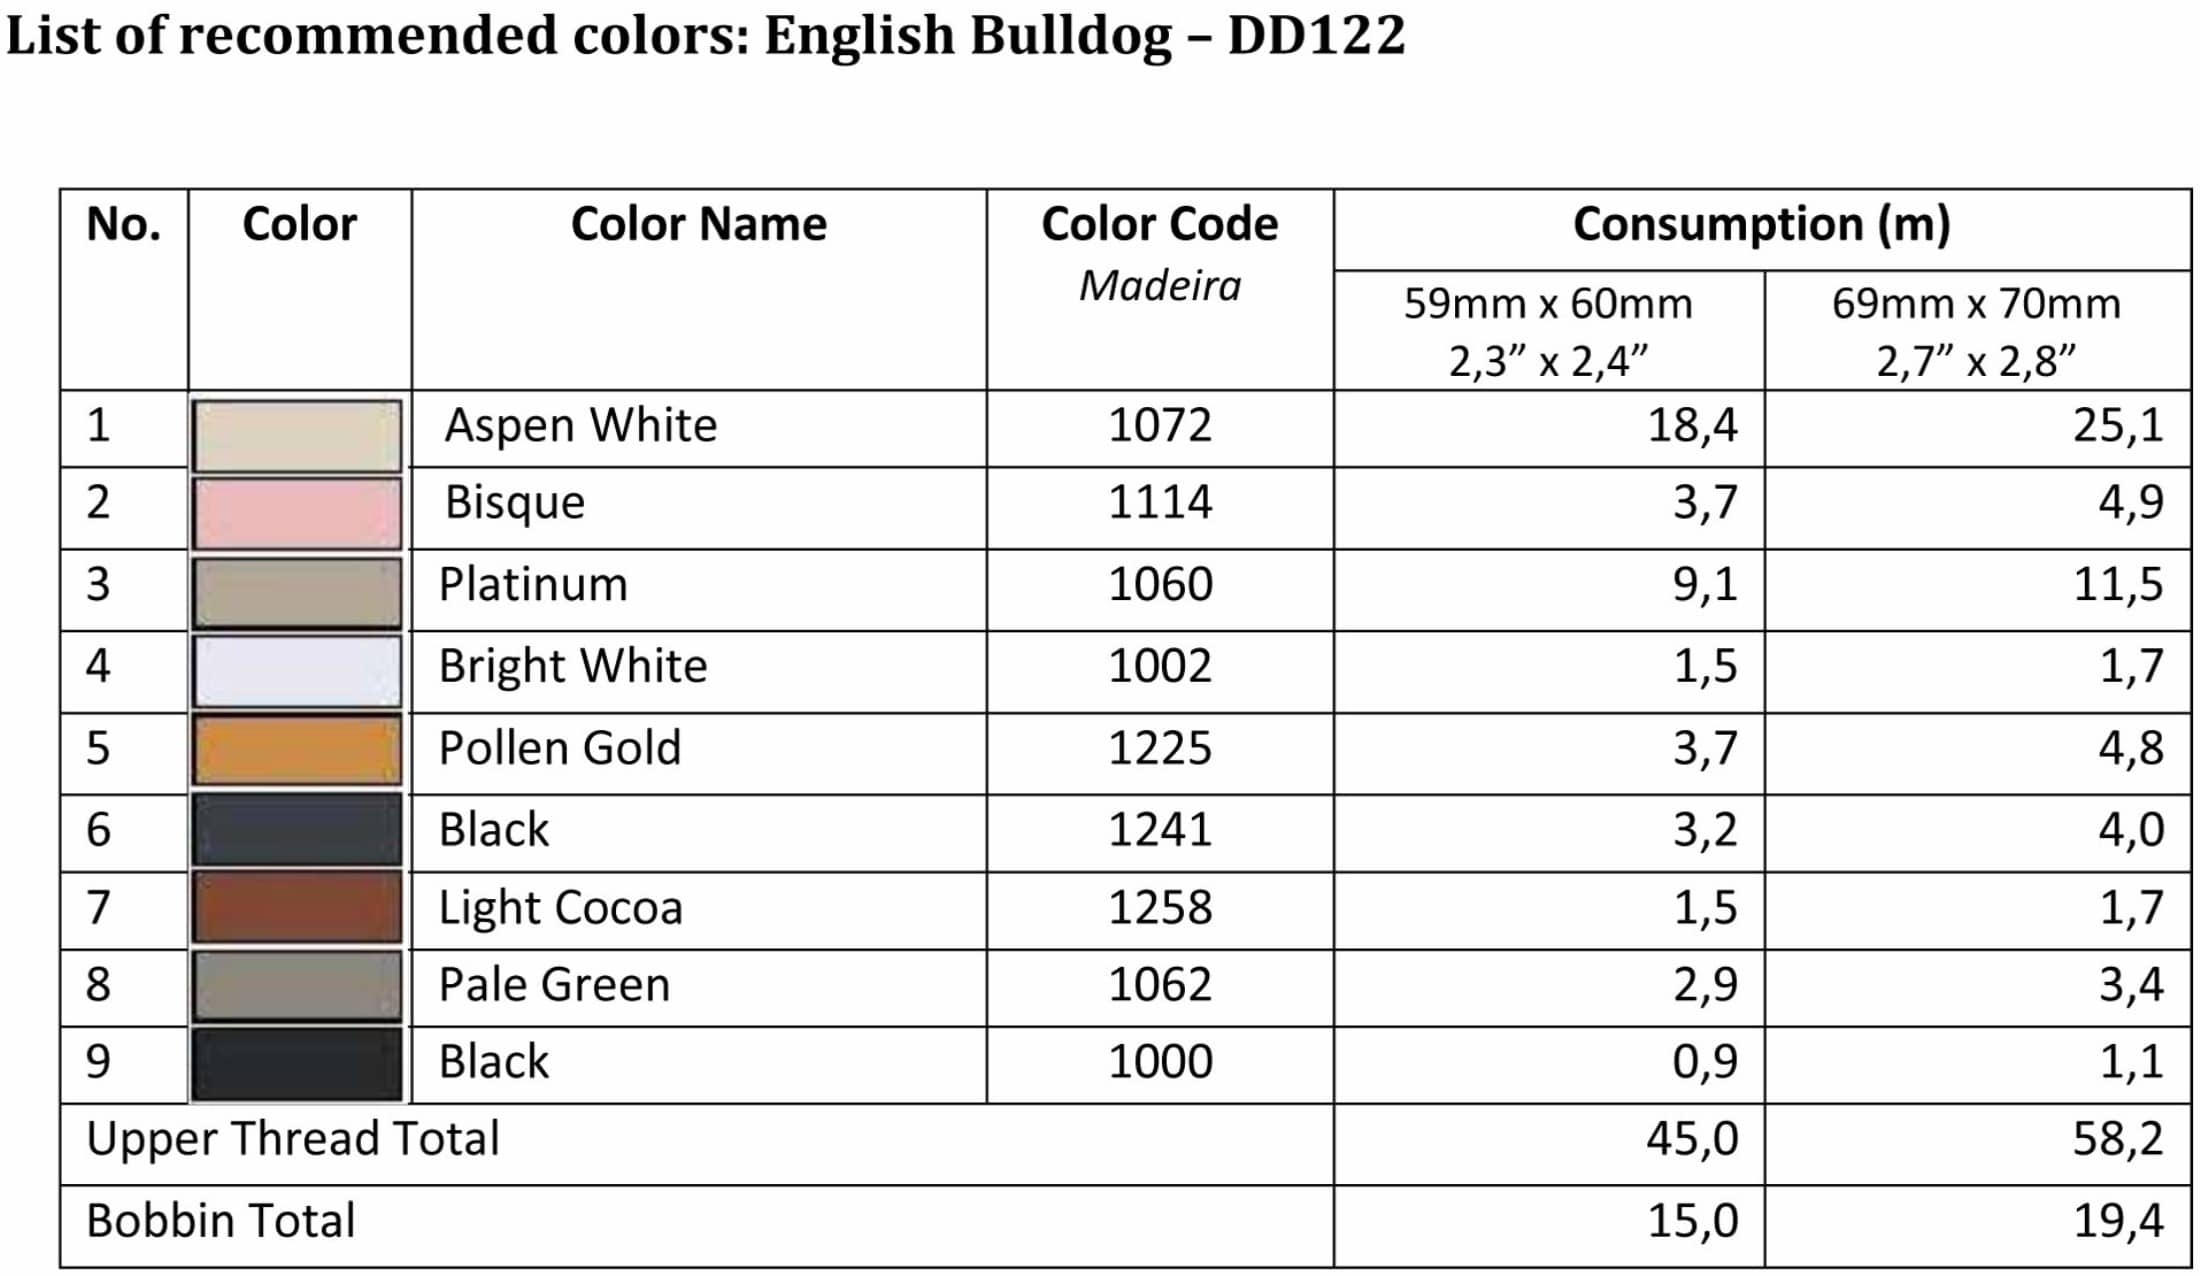 List of Recommended Colors - English Bulldog DD122